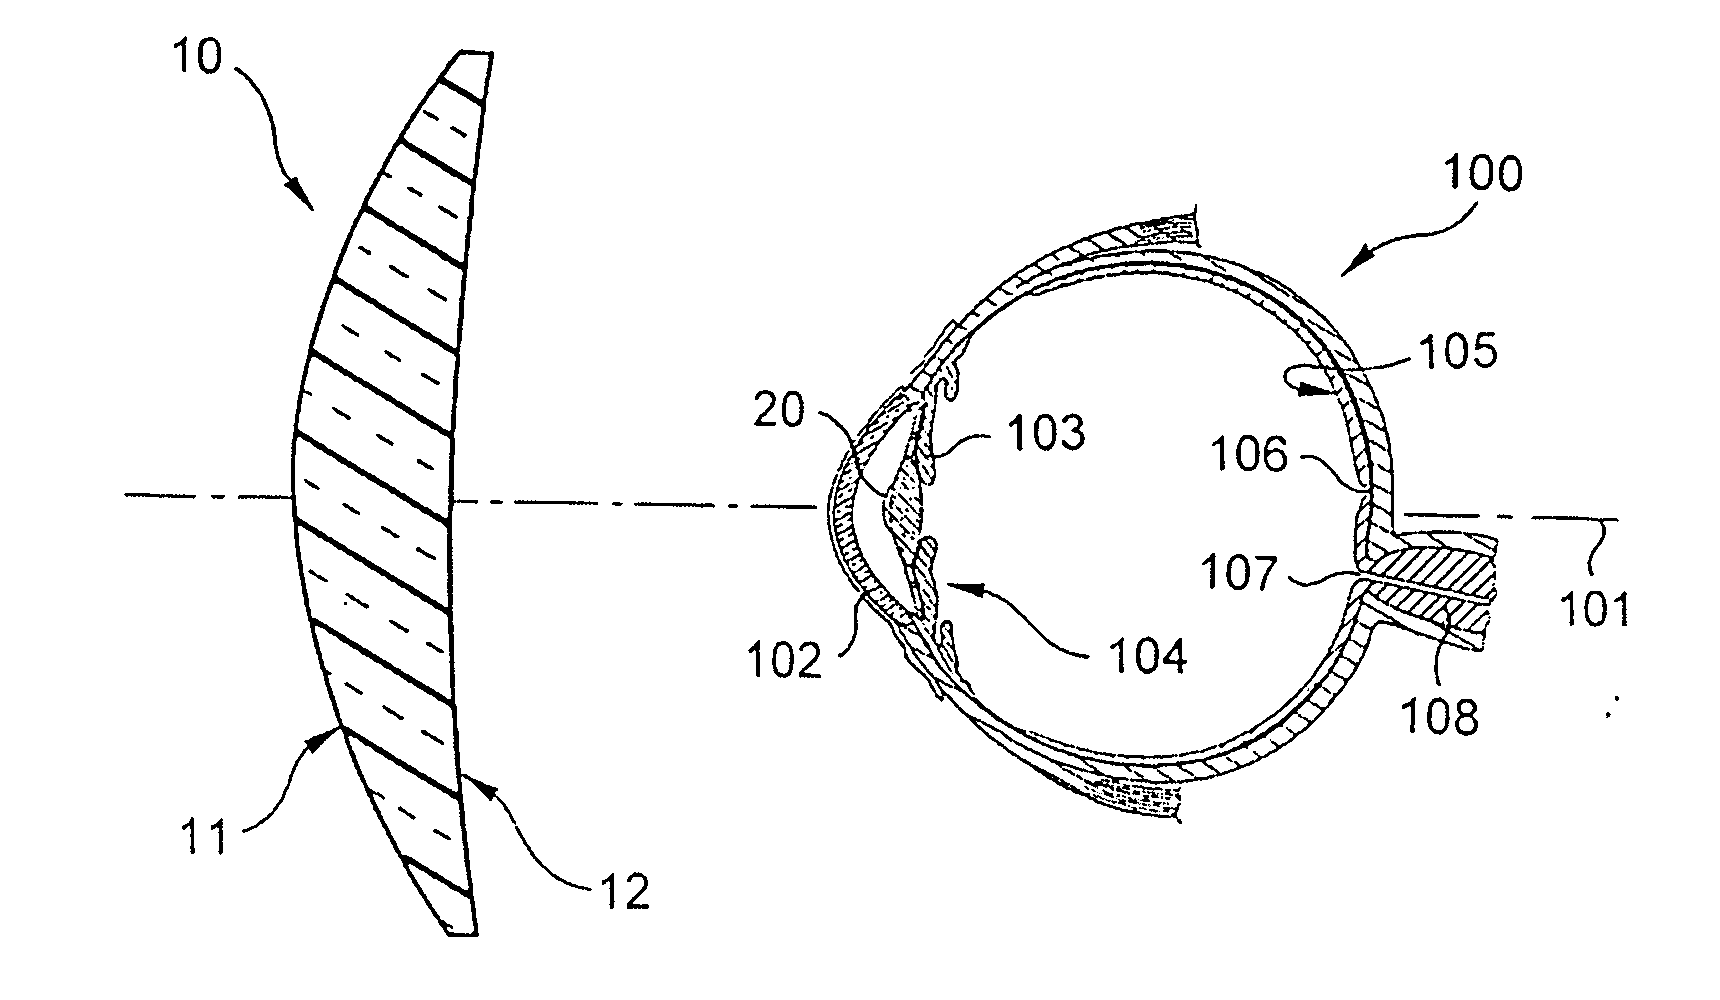 Optical accommodative compensation system